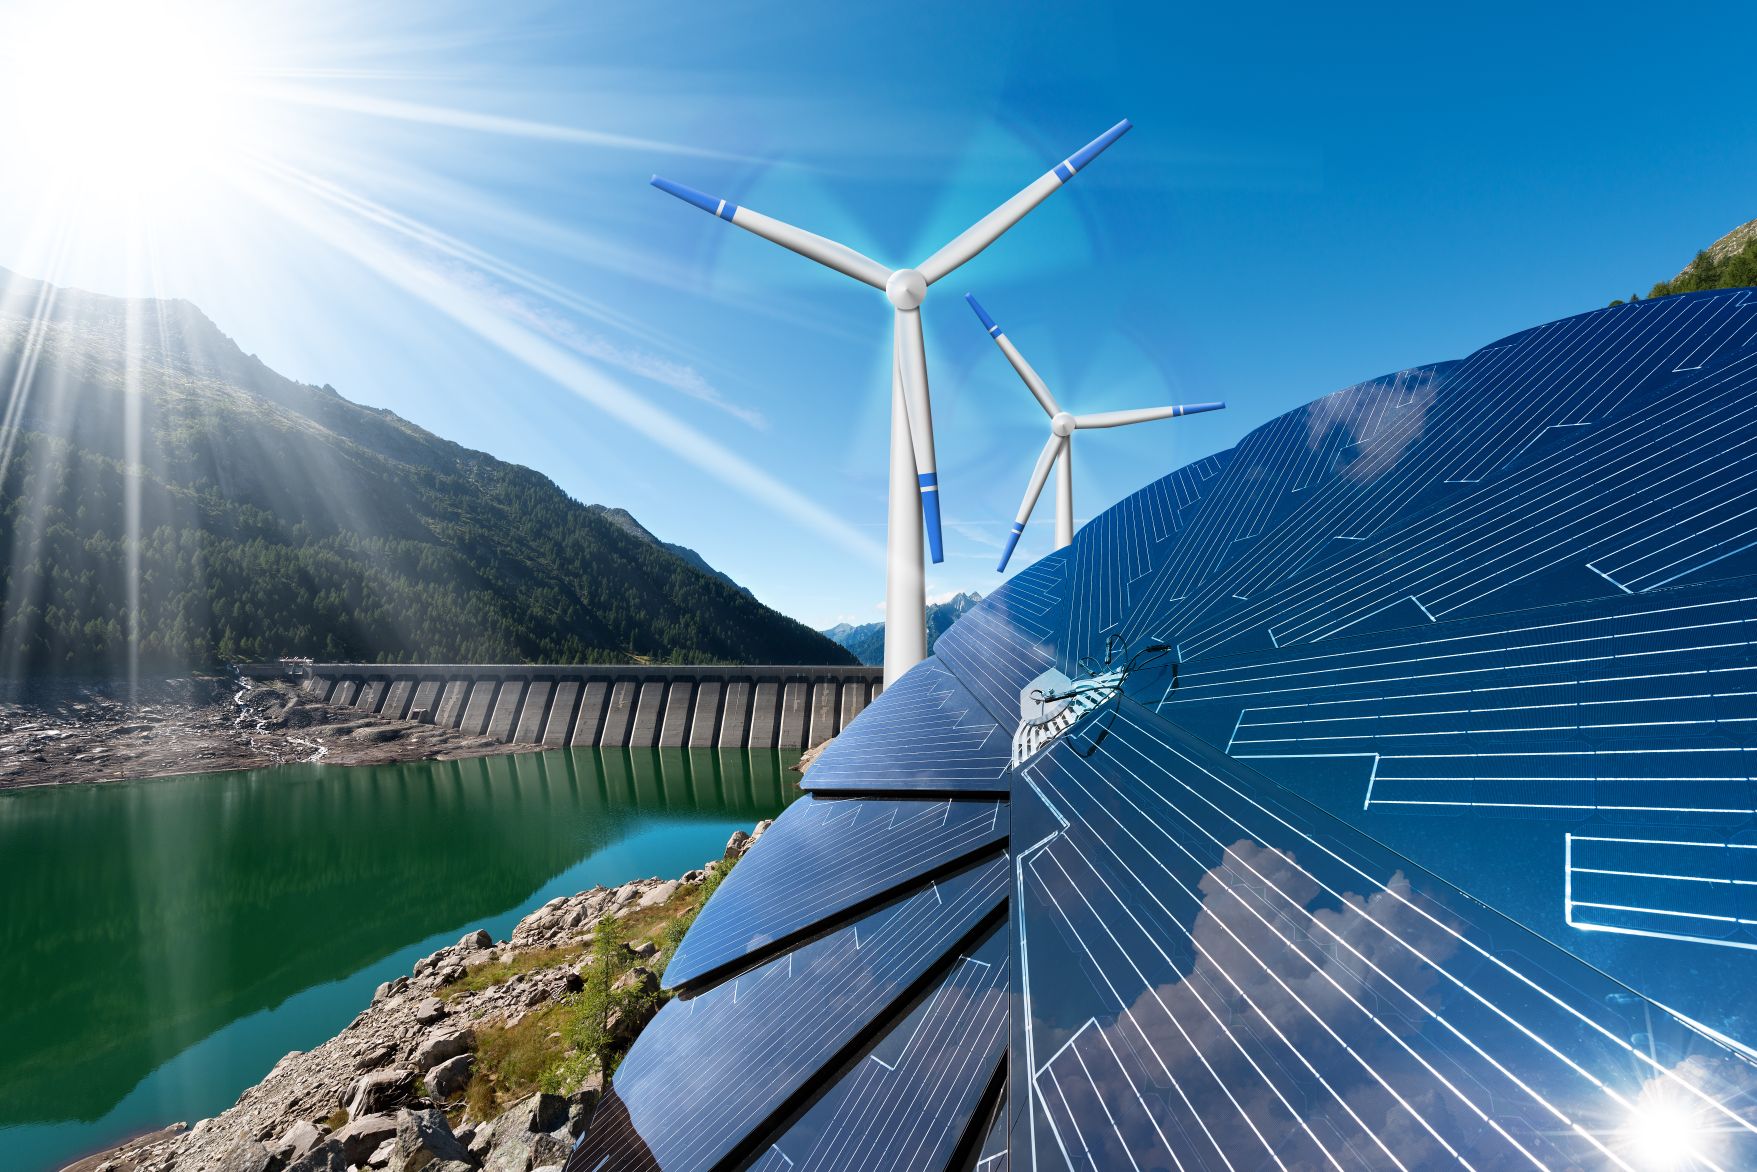 An image with solar panels, wind turbines and a Dam in the background